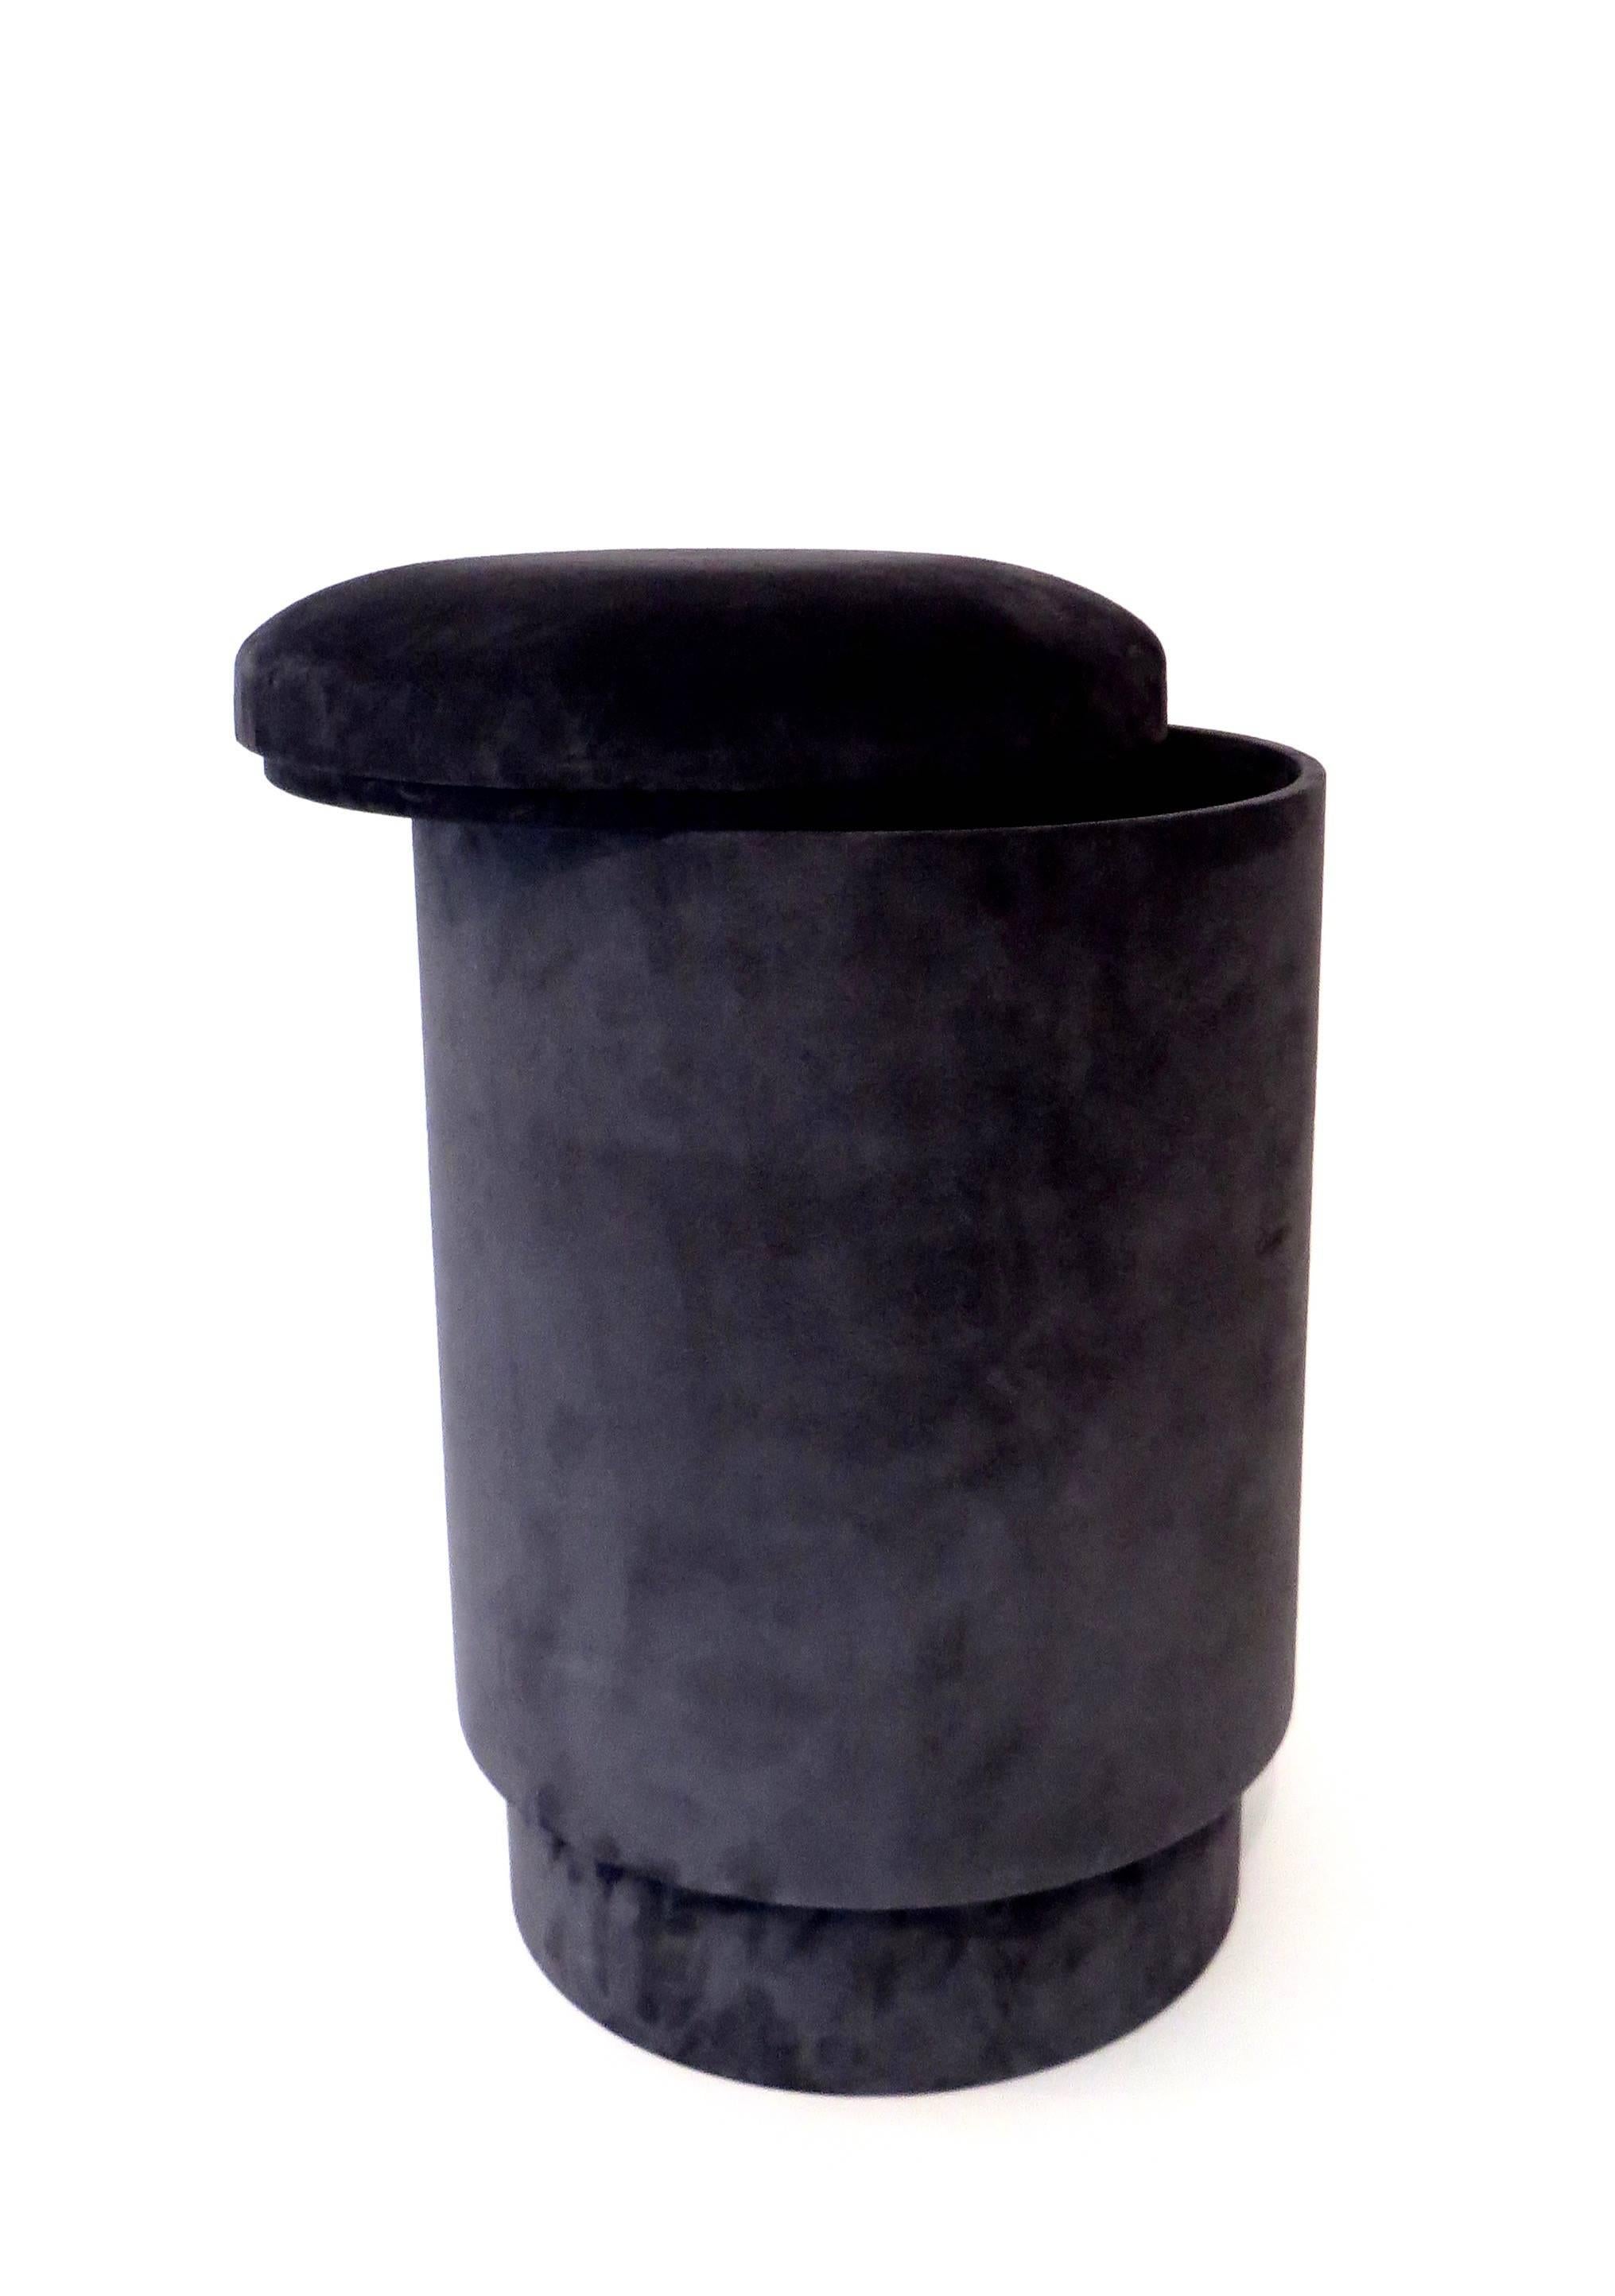 A Michael Verheyden pouf or tabou or stool with storage shown covered in dark gray suede. 
Pouf with storage space is covered in the most beautiful suede. Lined with black suede inside. 
Michael Verheyden is a Belgium based designer creating home